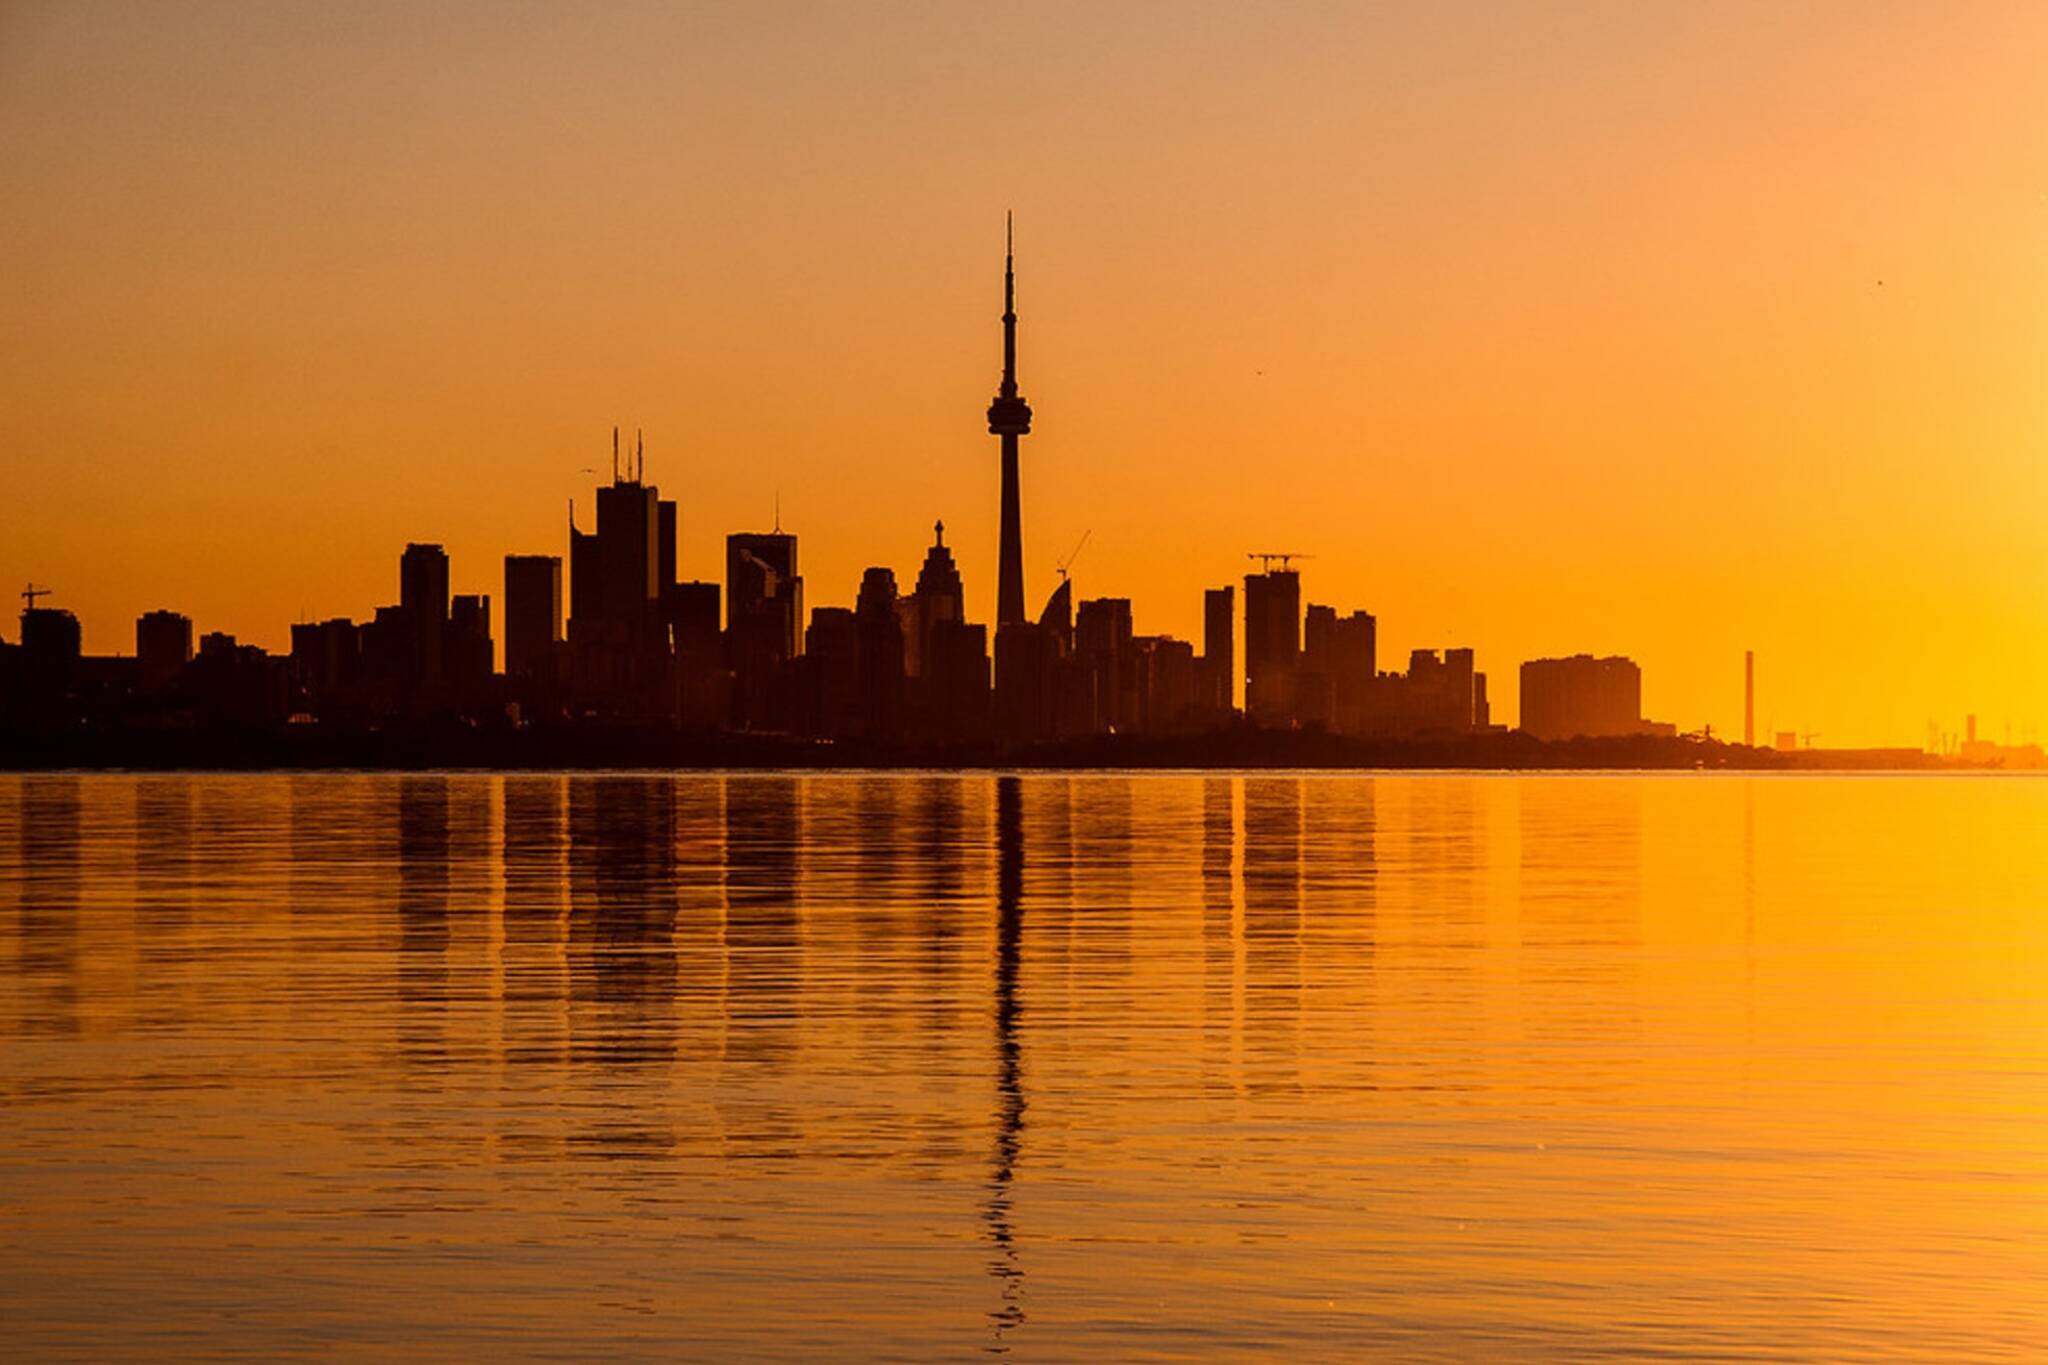 It's going to feel like 37 C in Toronto this weekend as temperatures